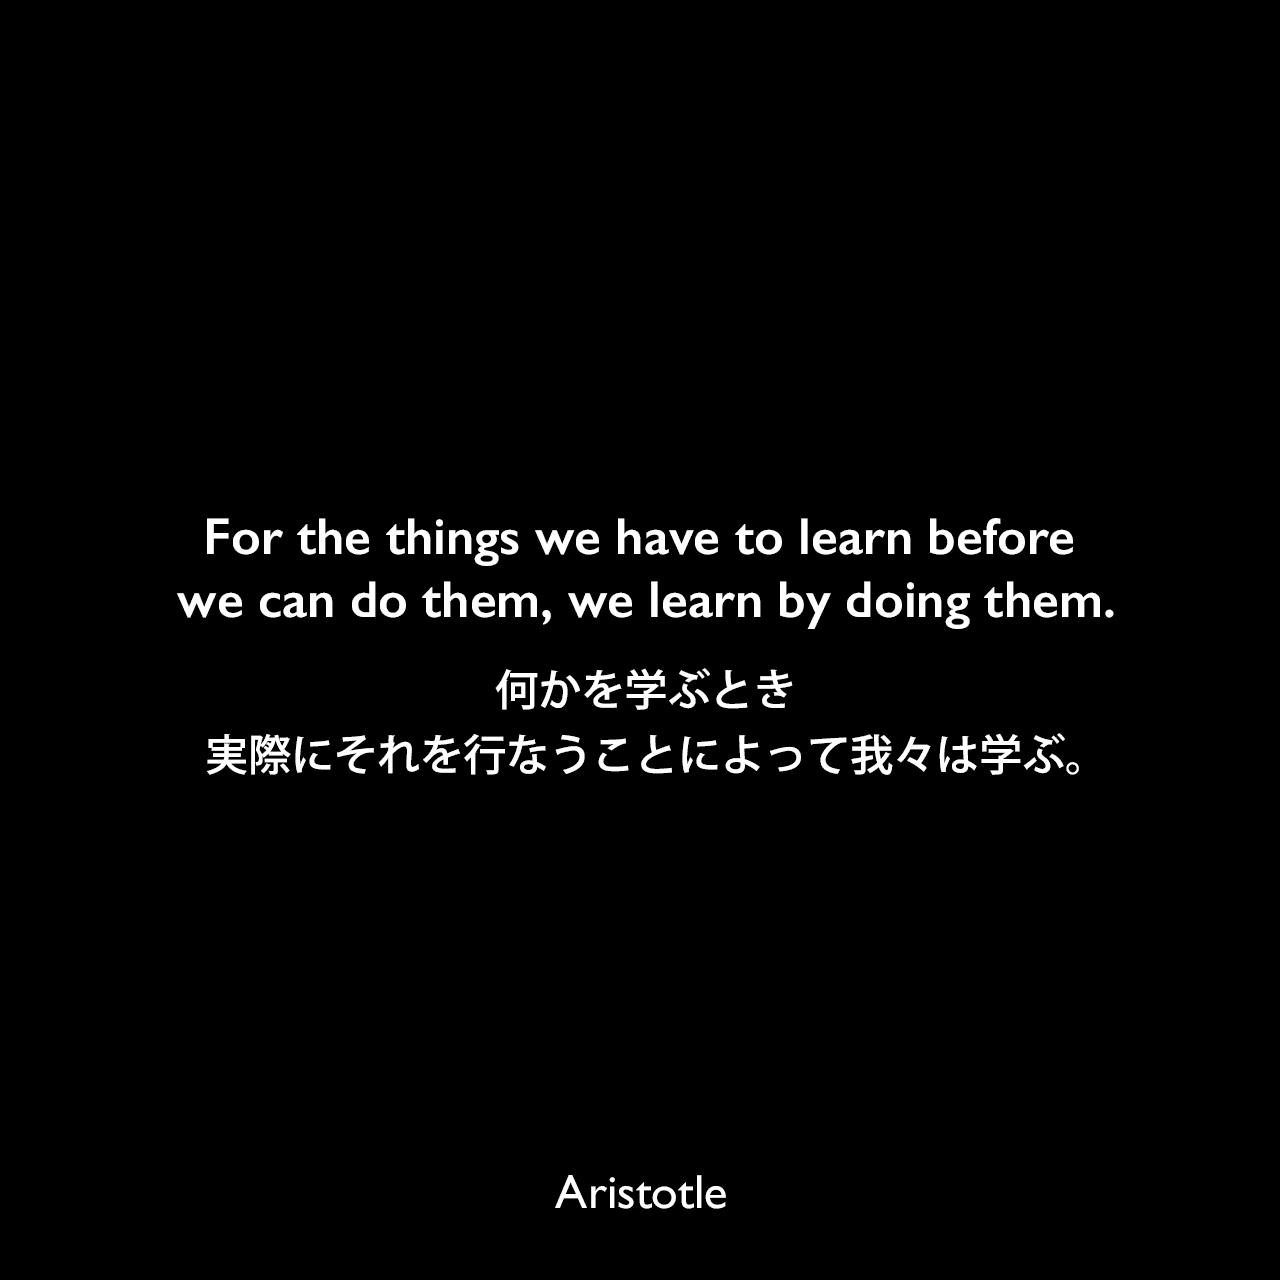 For the things we have to learn before we can do them, we learn by doing them.何かを学ぶとき、実際にそれを行なうことによって我々は学ぶ。Aristotle